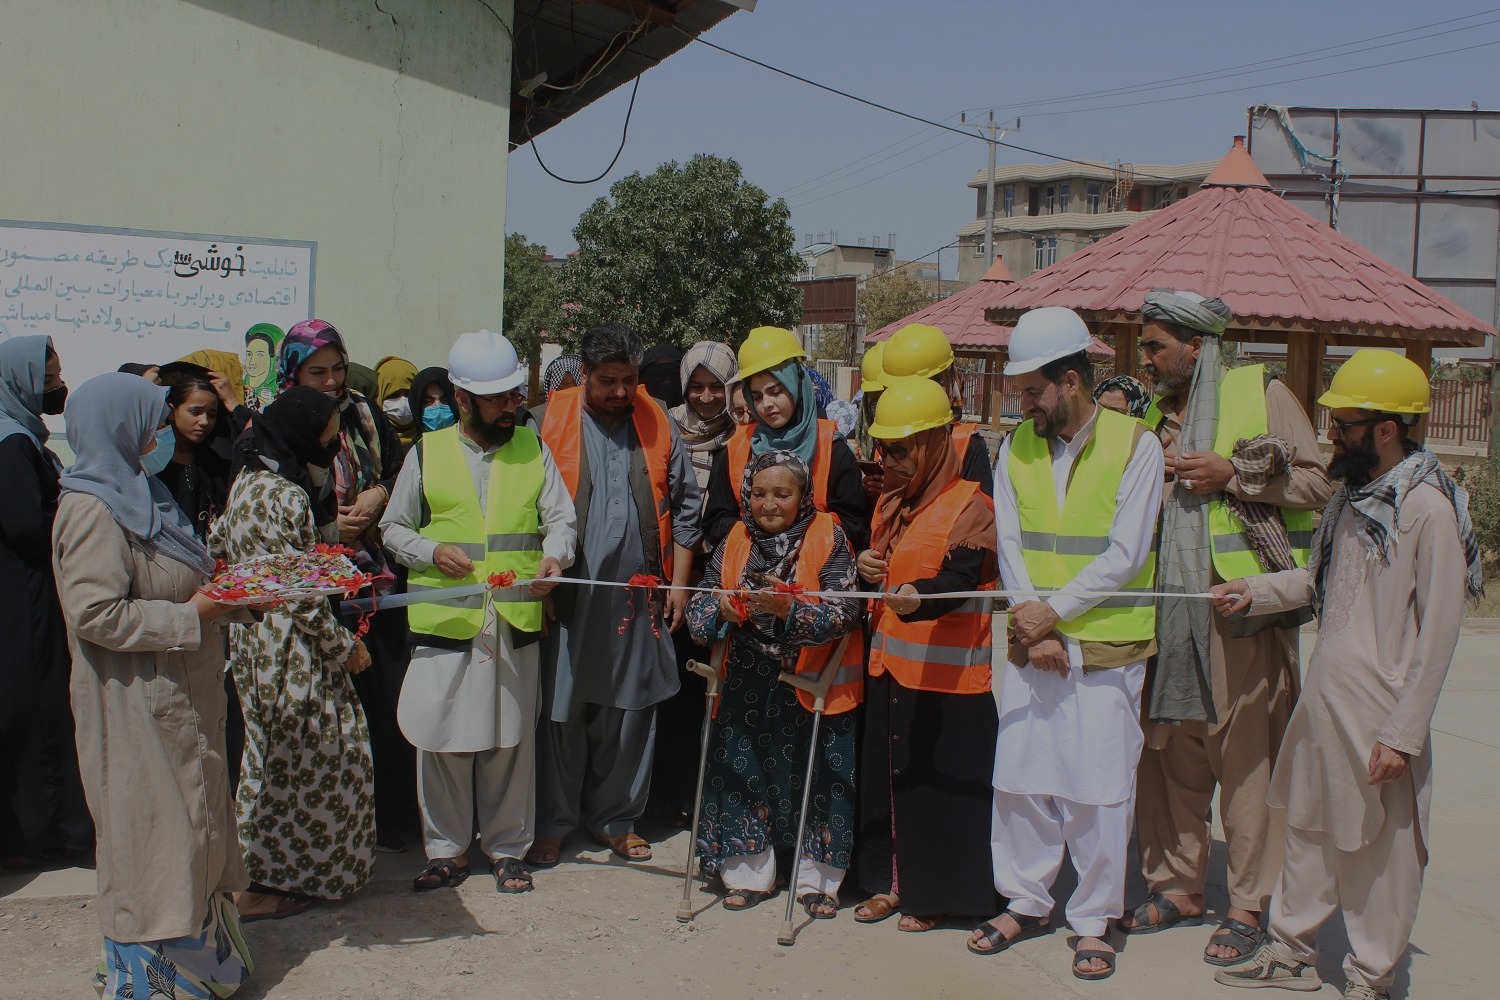 UN-Habitat Provides Safe Drinking Water and WASH Services to Employees of Rabia-e-Balkhi Women Market in Mazar-e-Sharif City